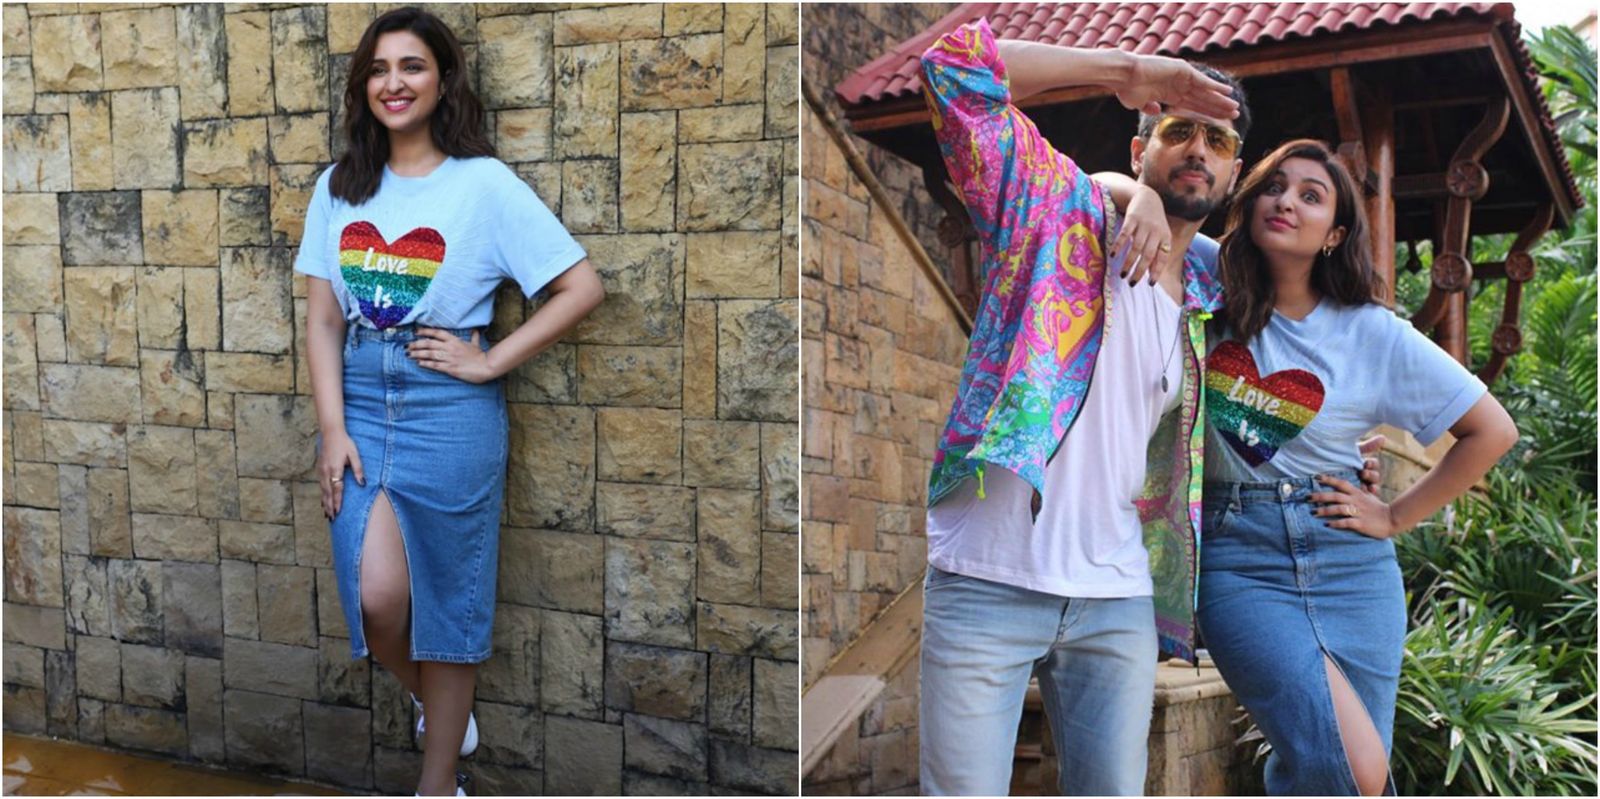 Parineeti Chopra’s Casual Look Has The Perfect Amount Of Bling You Need To Lighten Up Your Wardrobe